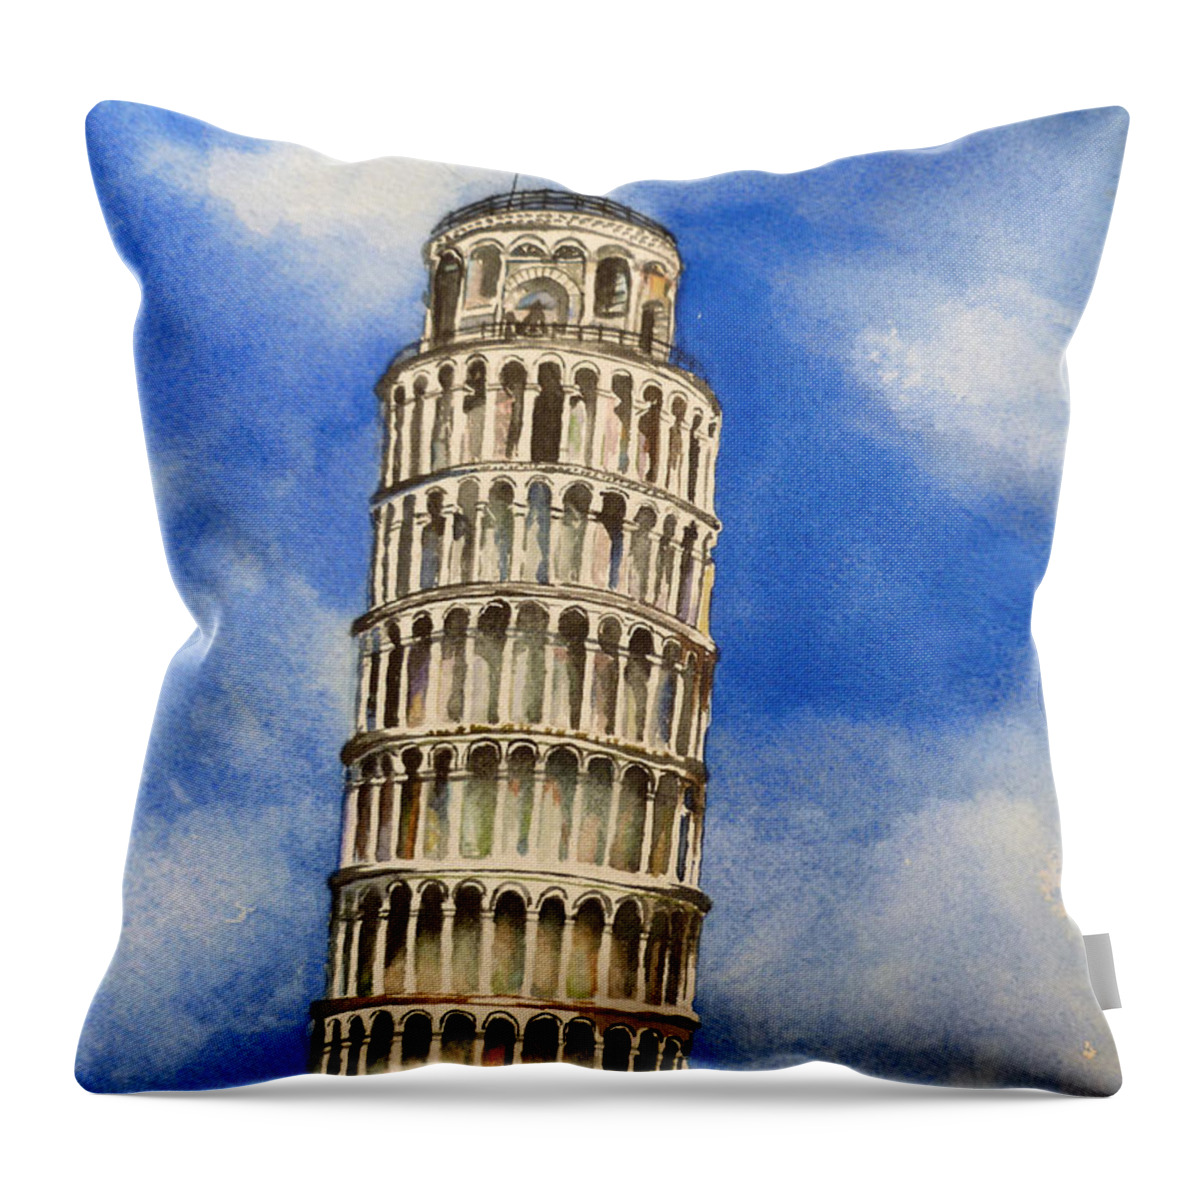 Leaning Tower Throw Pillow featuring the painting Leaning Tower of Pisa by Michal Madison